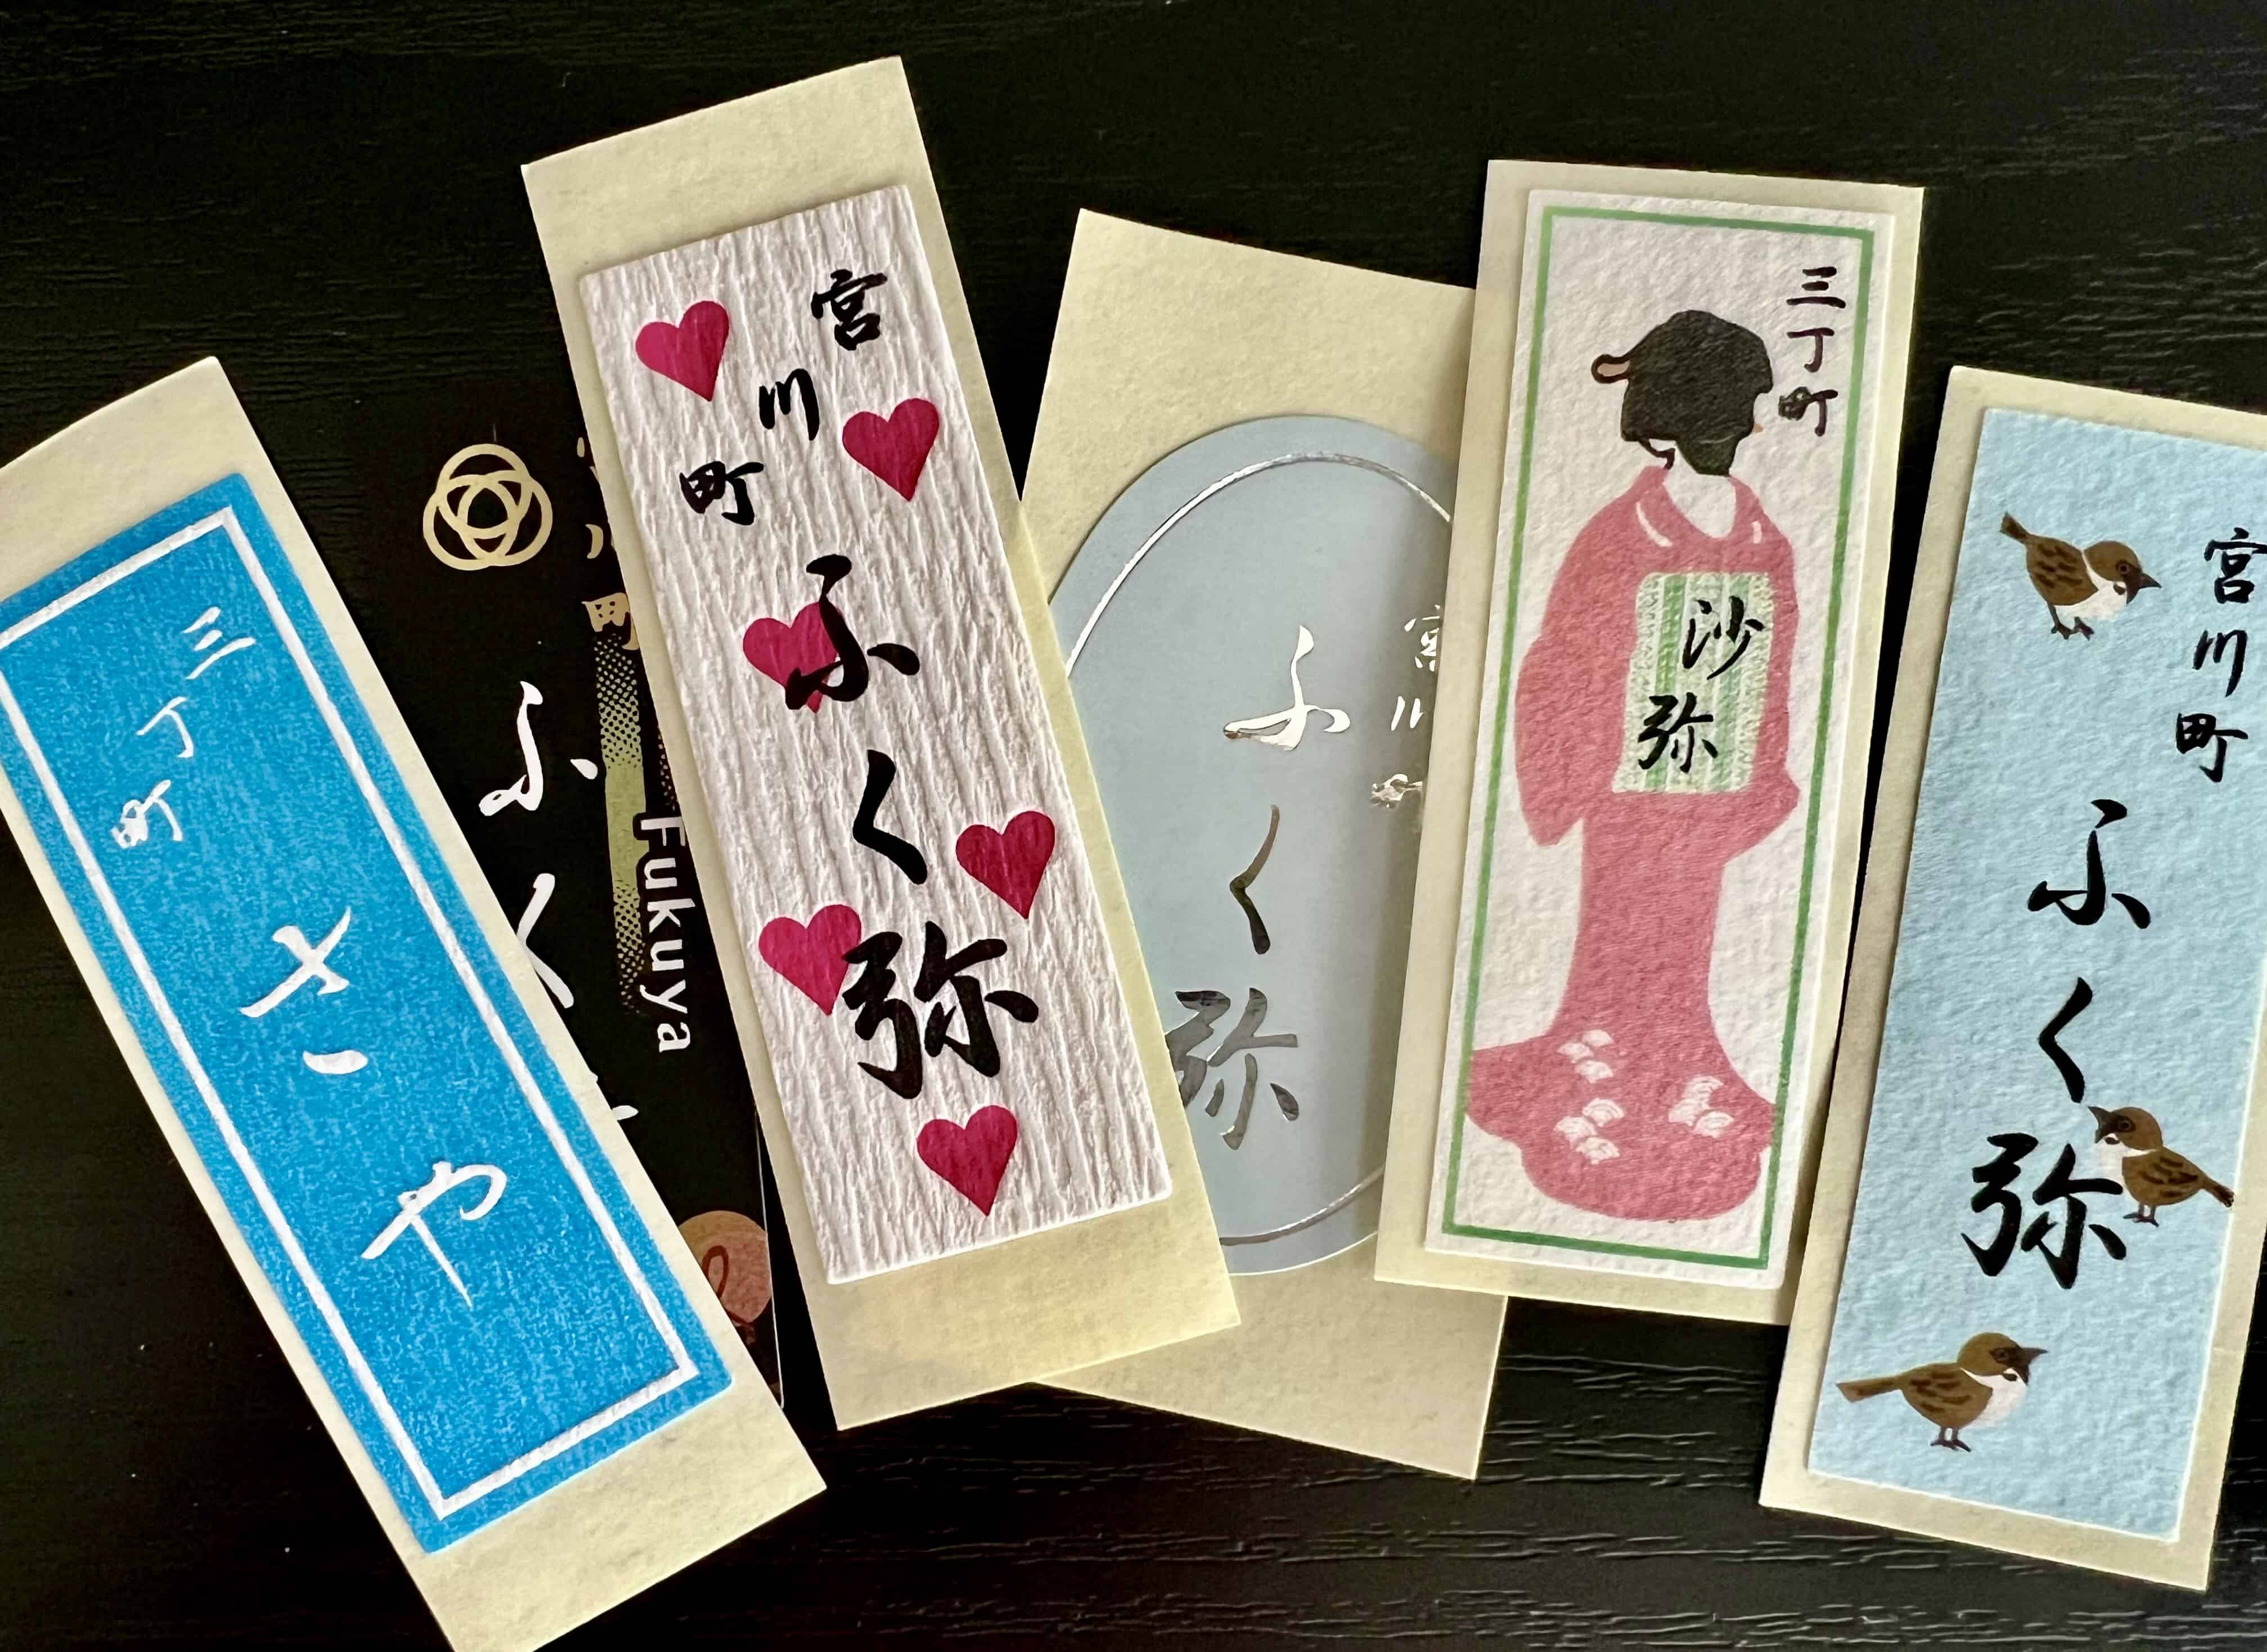 Colorful stickers with writing and an illustration of a woman in a kimono.